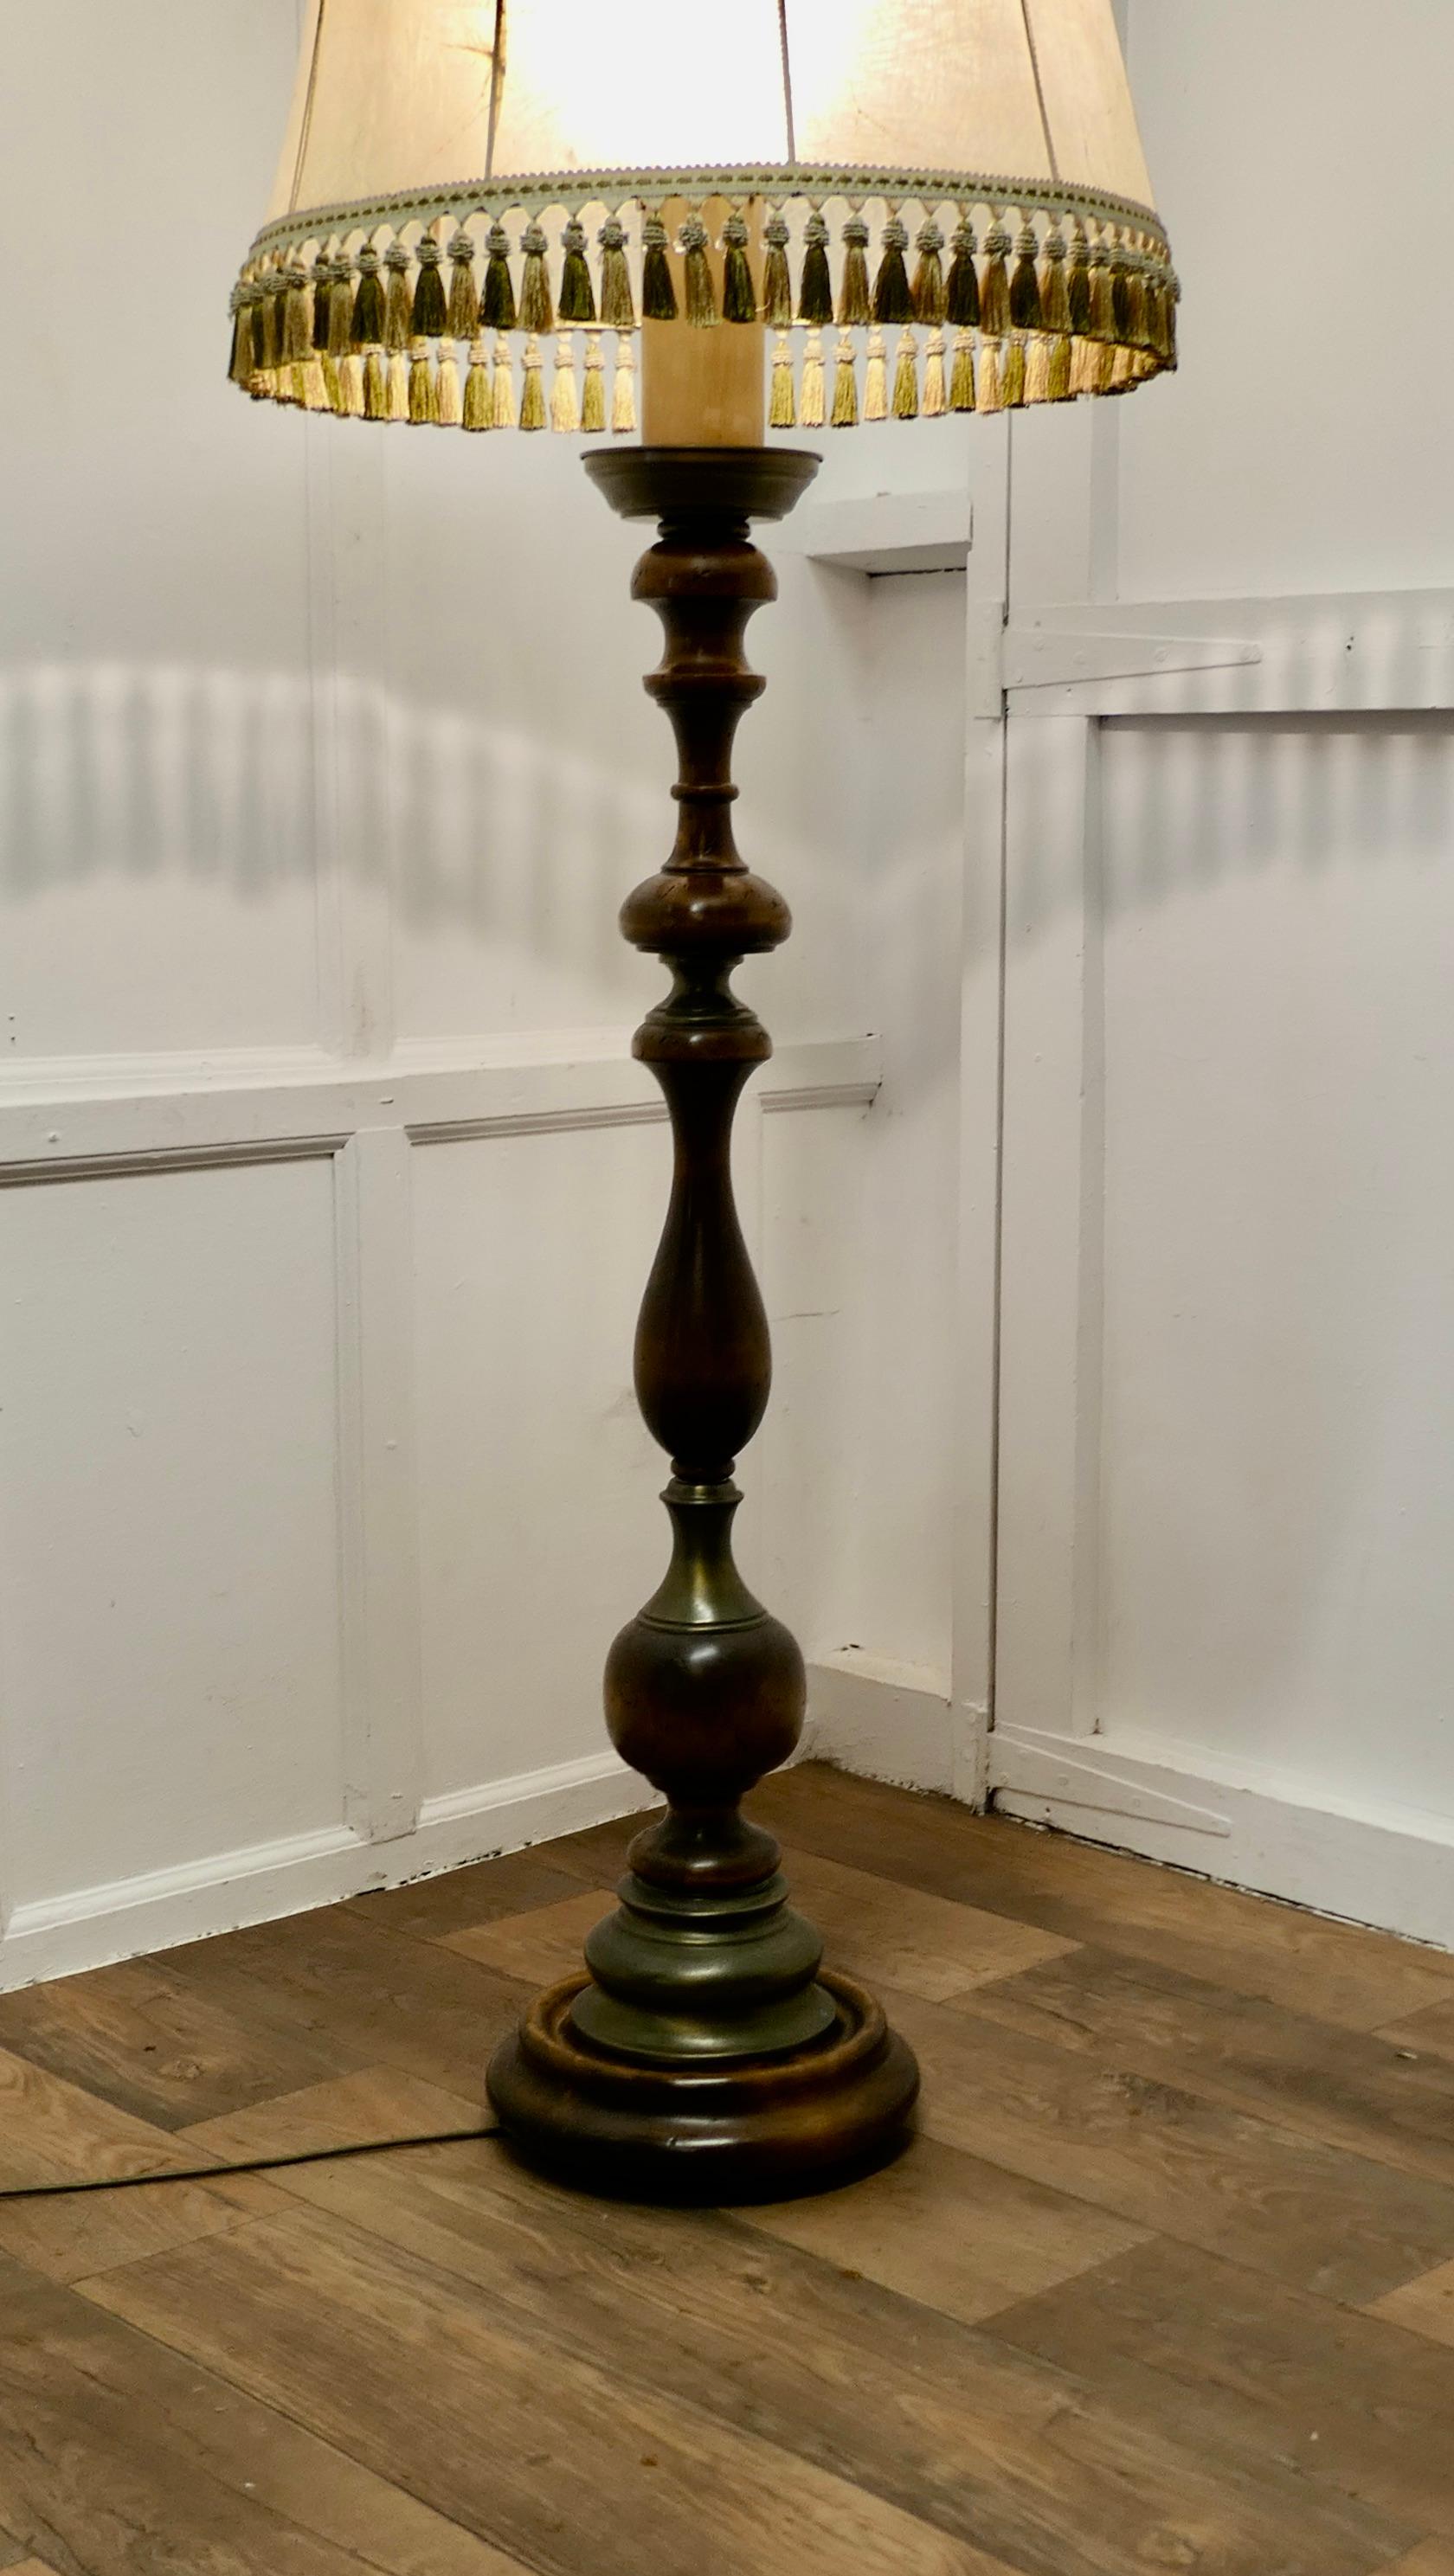 Chunky Oak Standard or Floor Lamp 

This lamp is a country piece, with a very bulbous turned oak  central column
The lamp is in good condition, working and is shown with its original velum lampshade

The lamp is 70” tall, the base is 14” in diameter